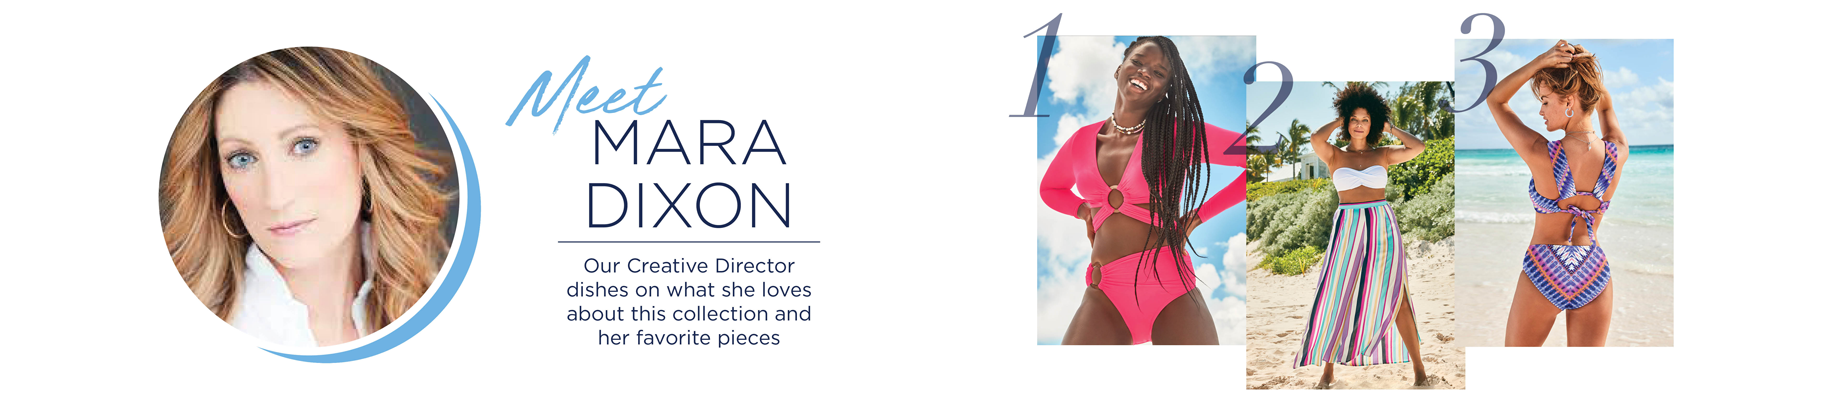 Meet Mara Dixon. Our Creative Director dishes on what she loves about this collection and her favorite pieces